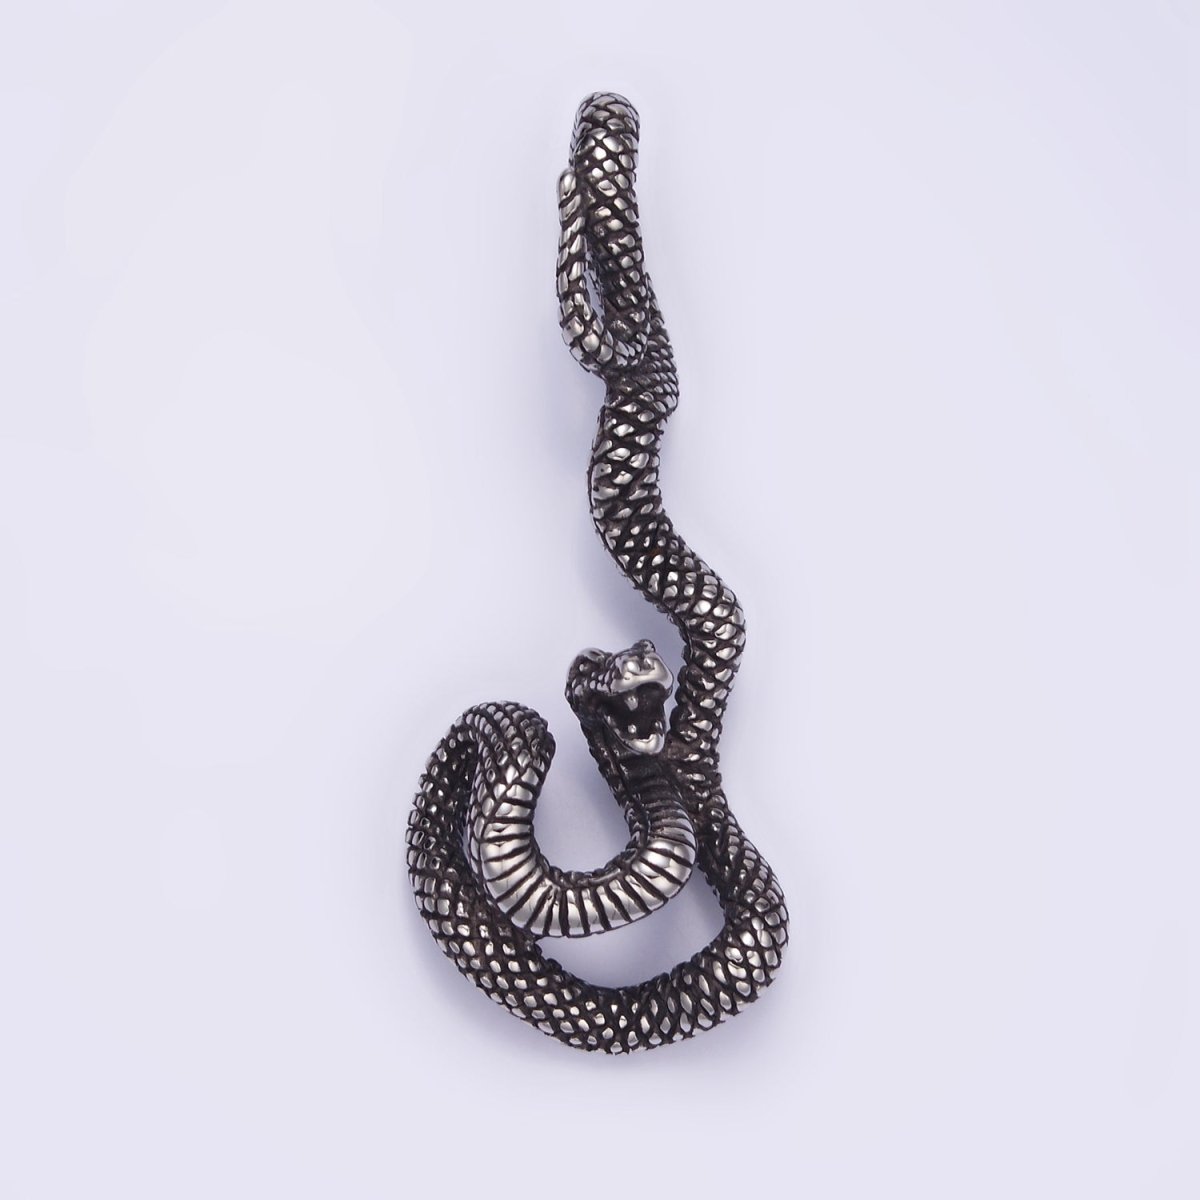 Stainless Steel Curled Serpent Snake Drop Oxidized Silver Pendant | P1466 - DLUXCA